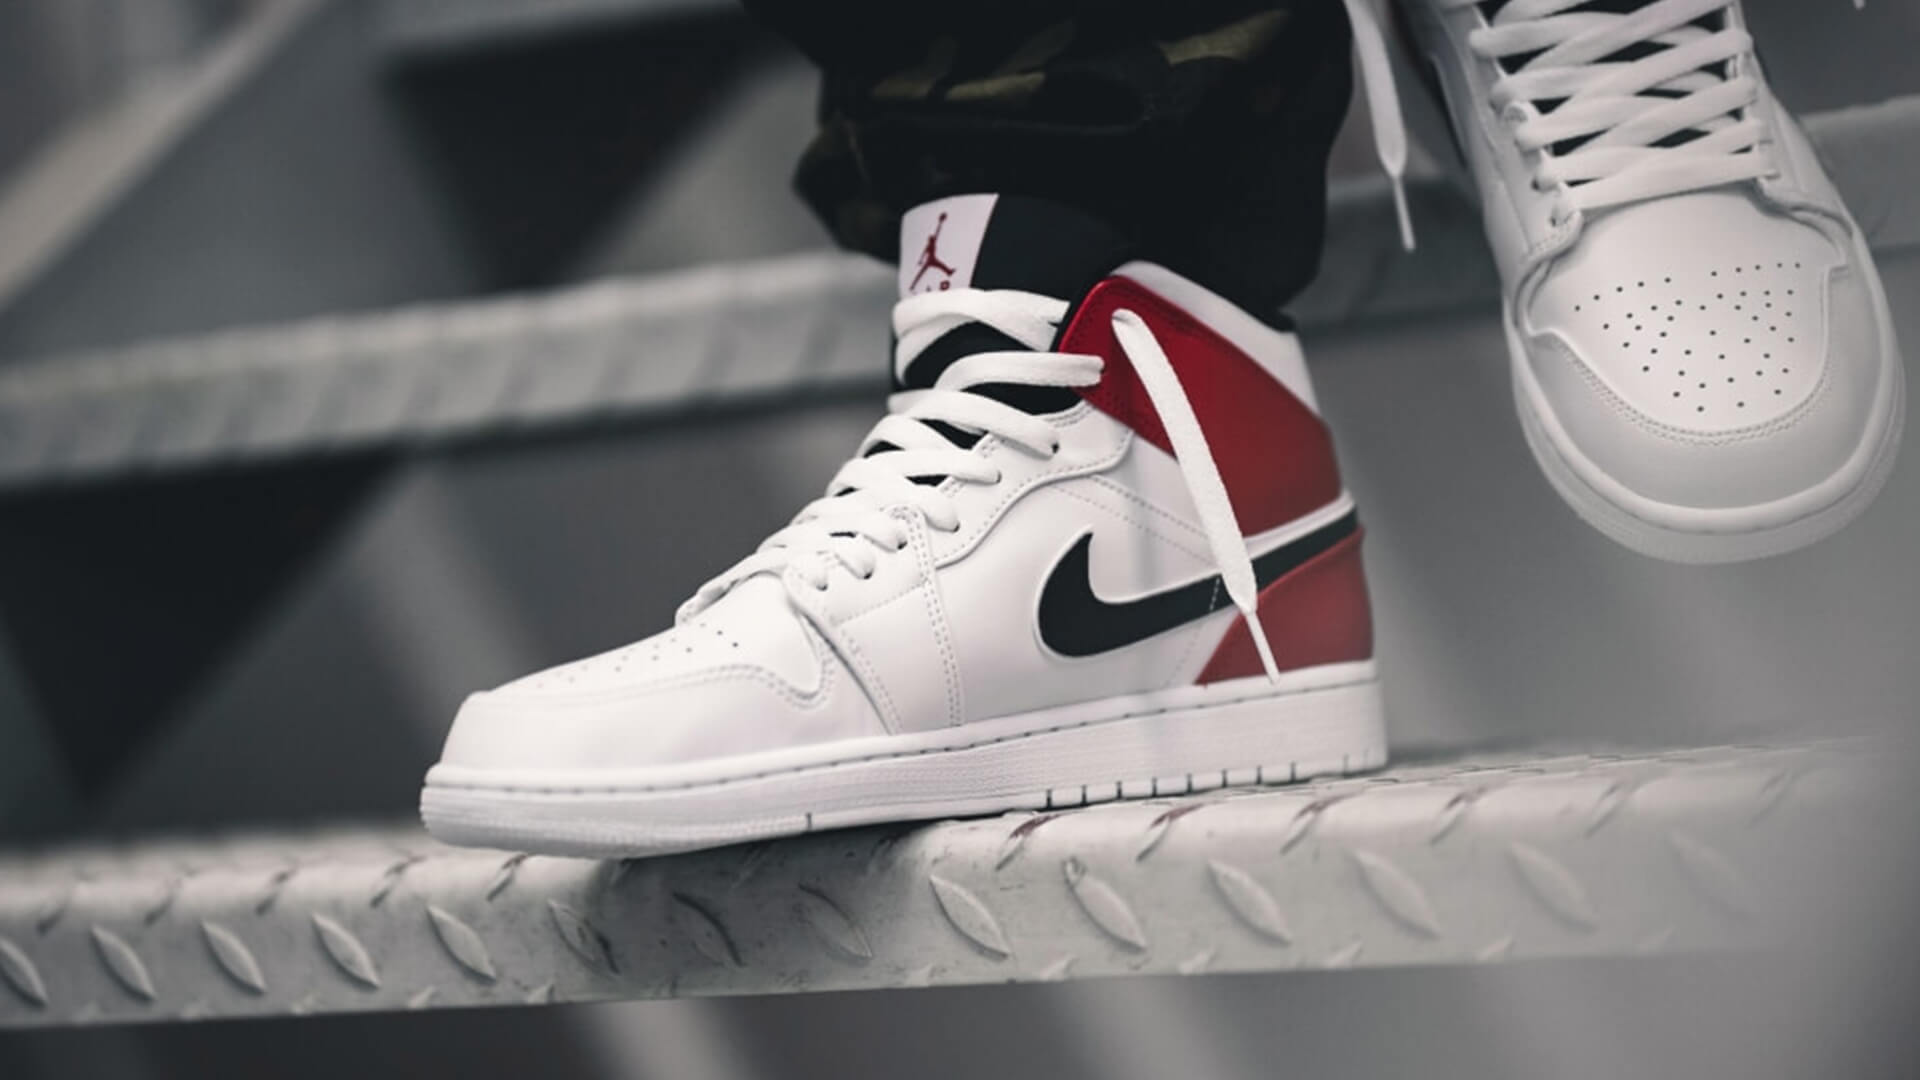 Mordrin Vandalir Disipar Latest Nike Trainer Releases & Next Drops in 2020 | The Sole Supplier